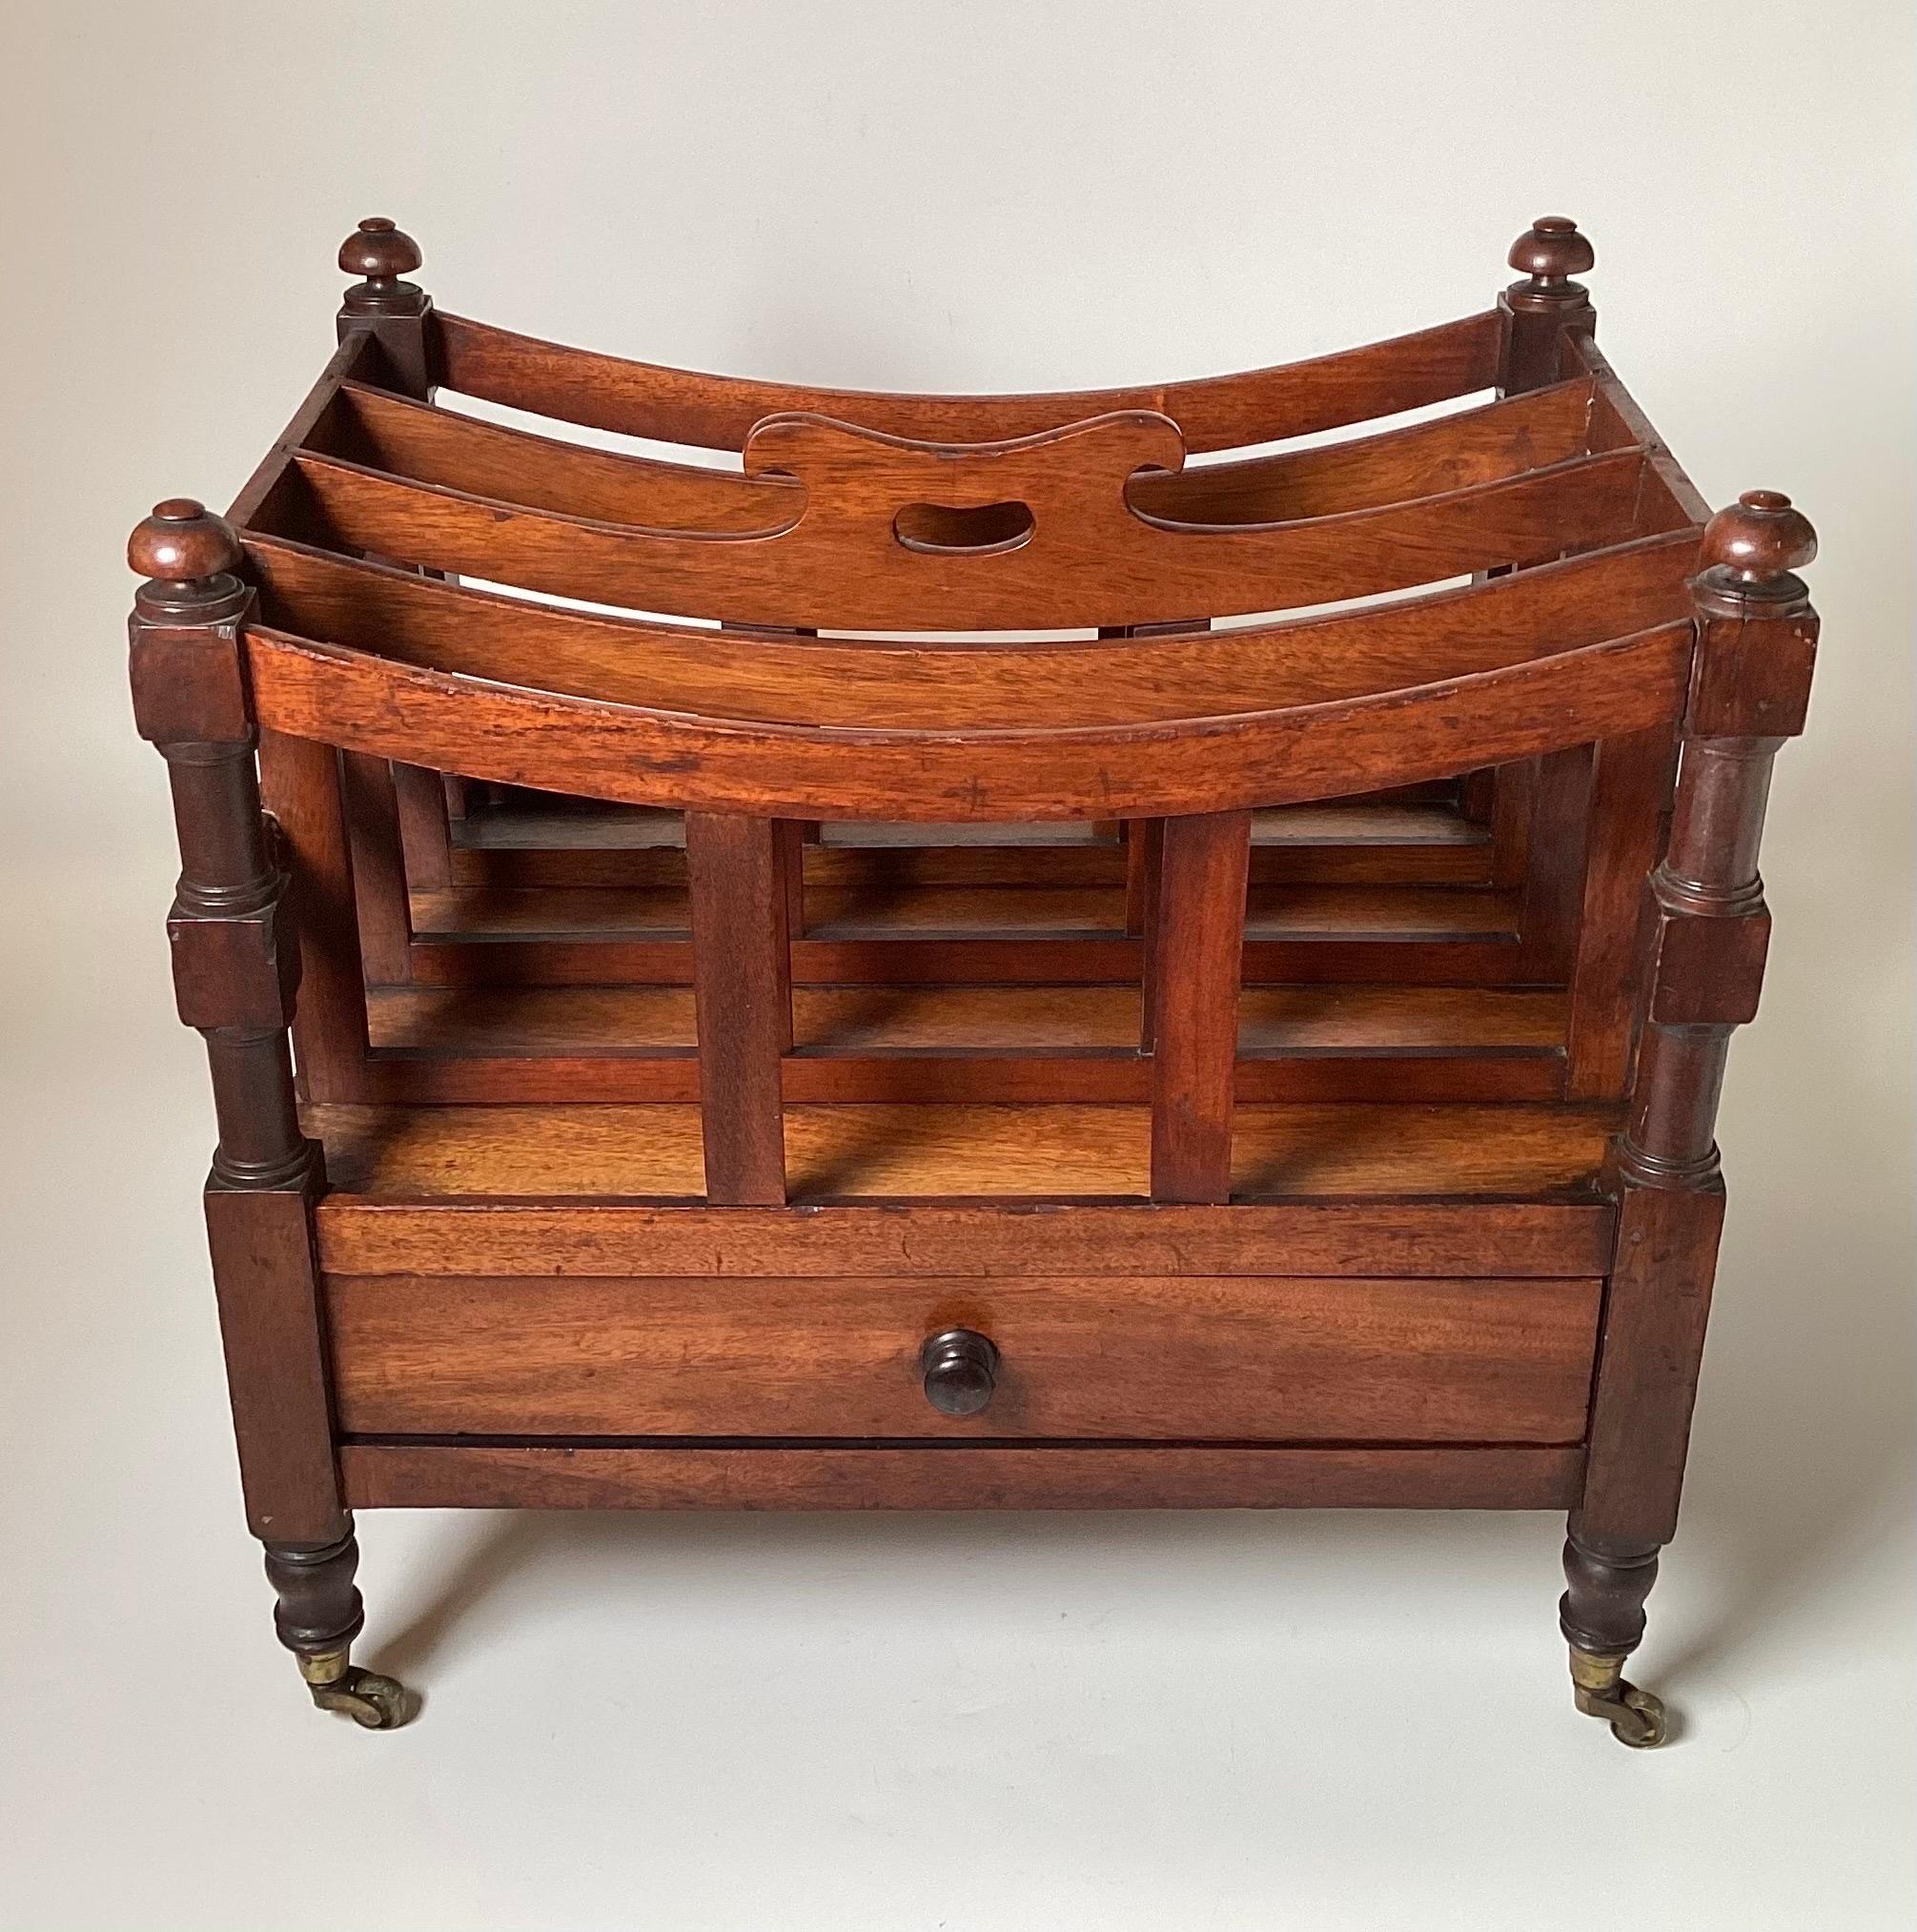 A classic English Regency style walnut music or newspaper Canterbury stand.  The bowed top railings with built in handle with original brass castors, four sections with dovetail construction.  